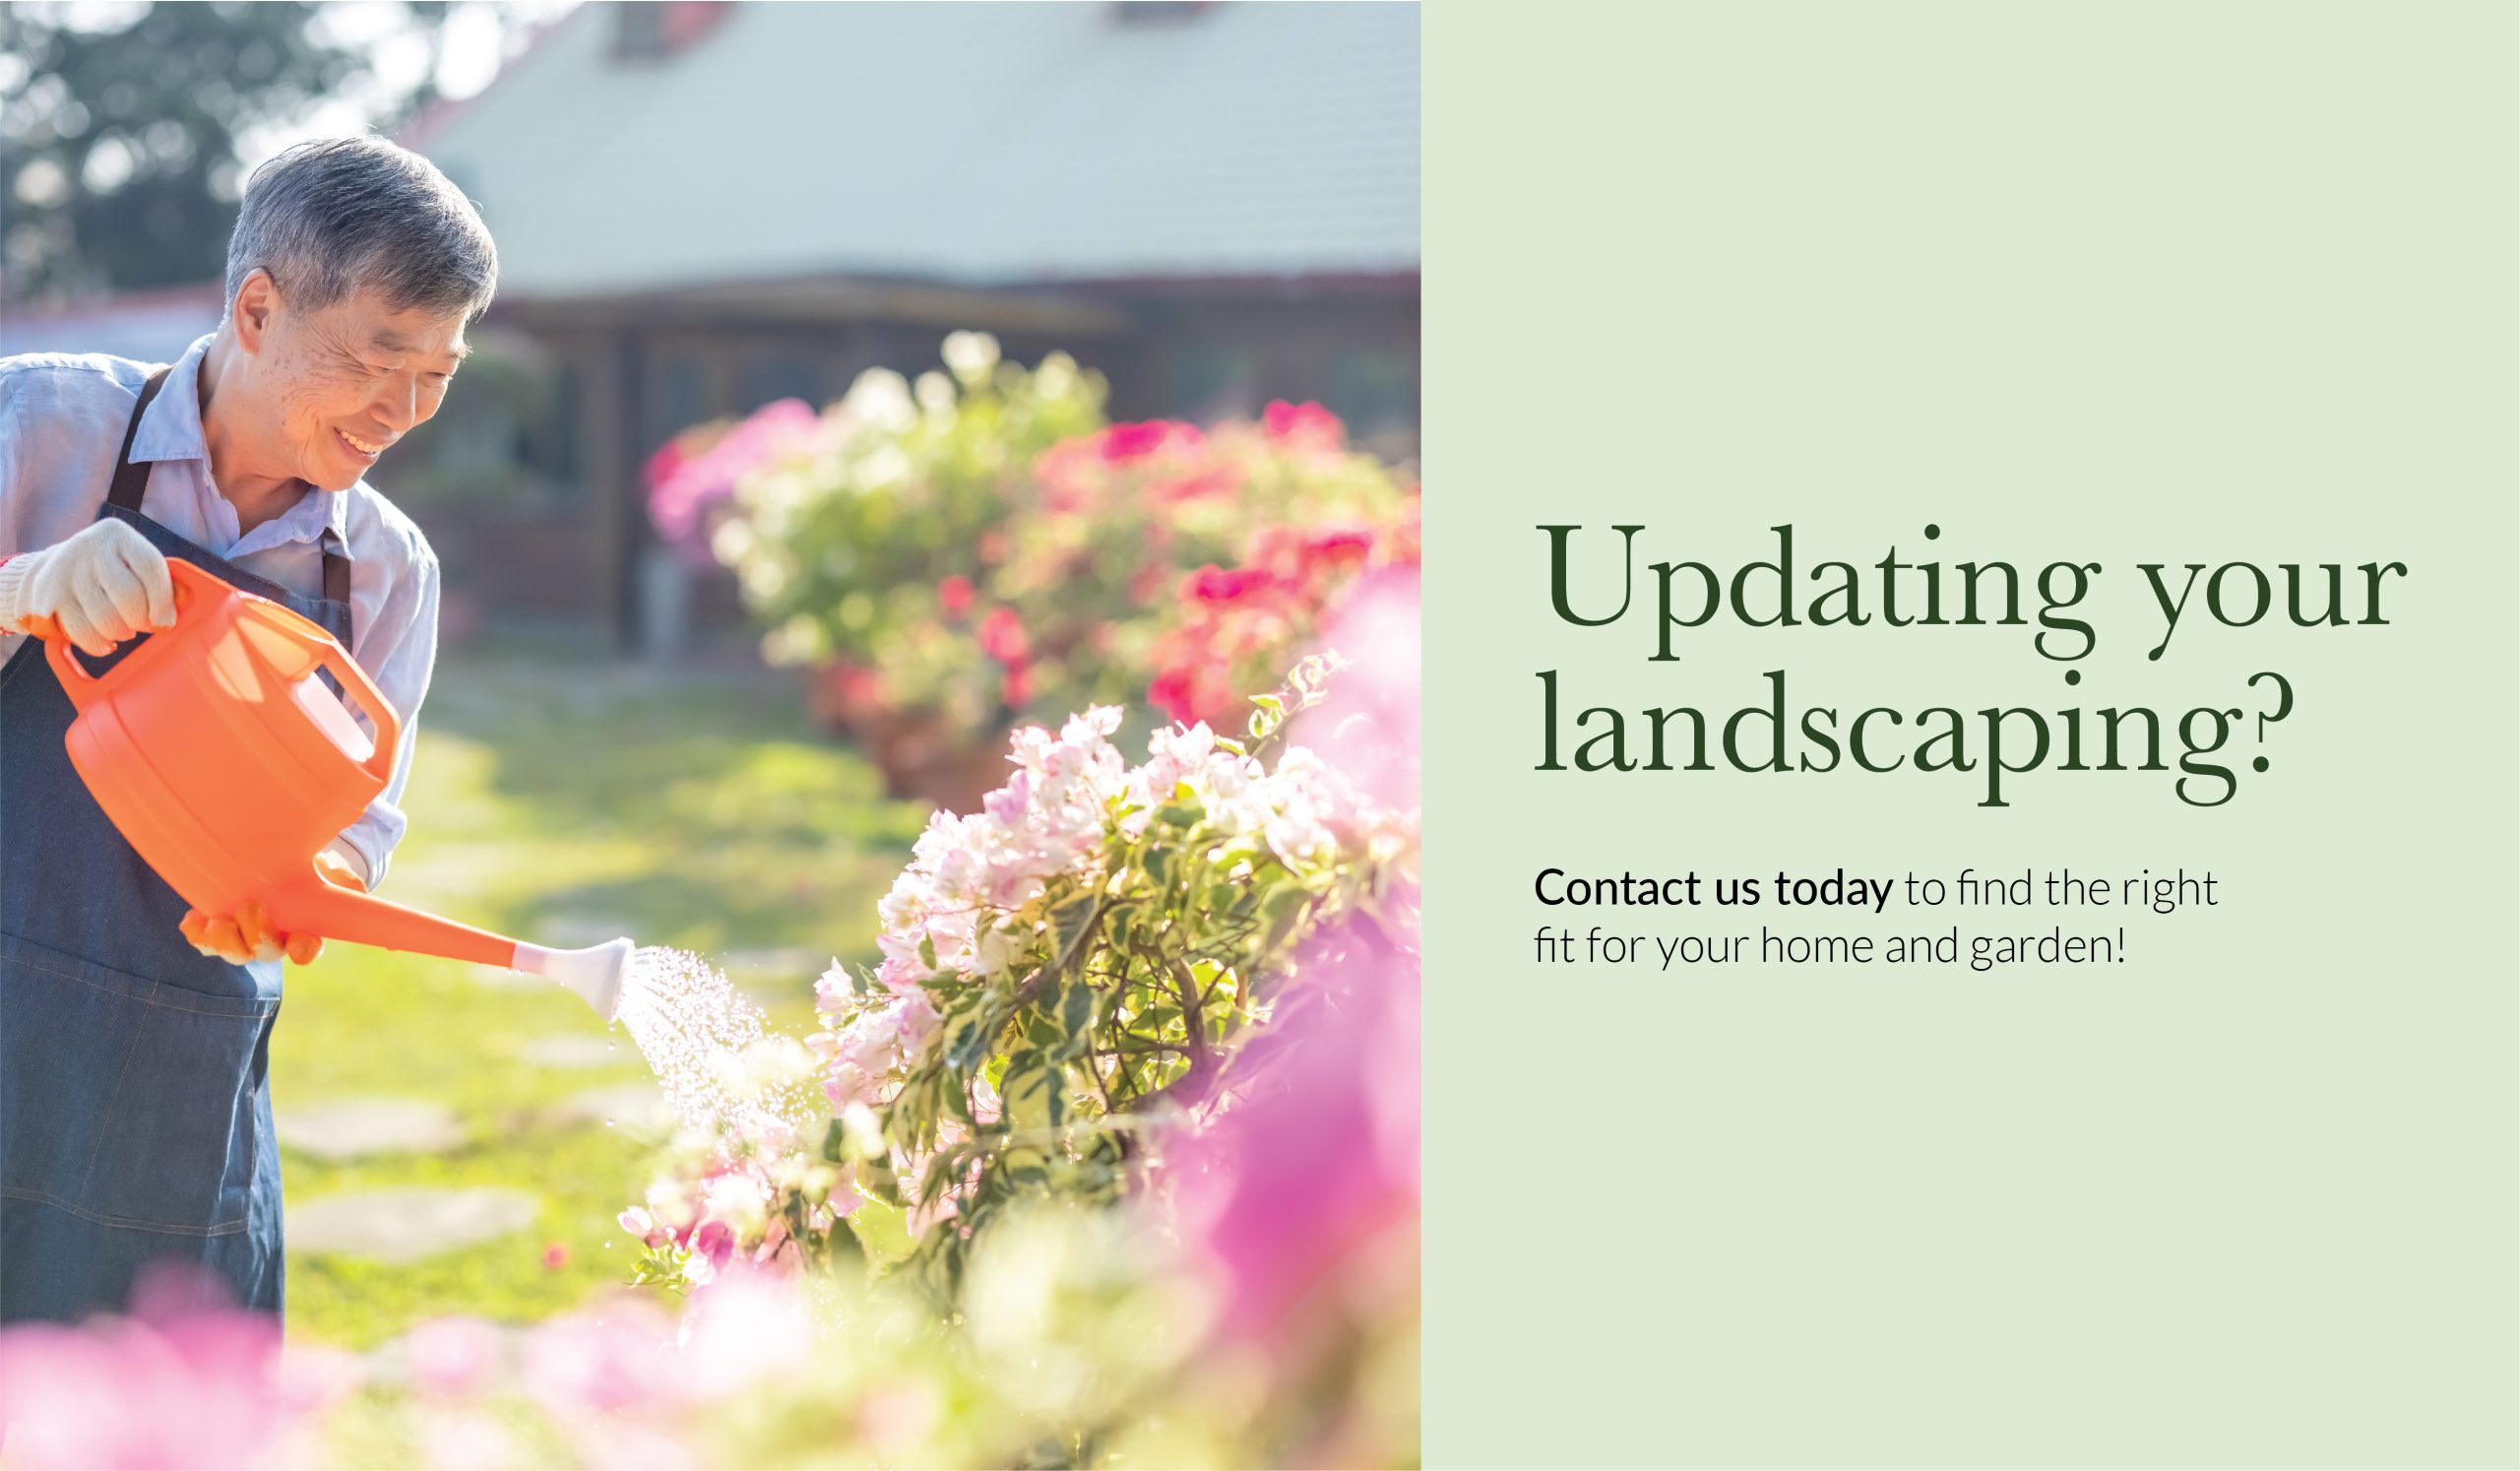 Updating your landscaping? Contact us today to find the right fit for your home and garden!